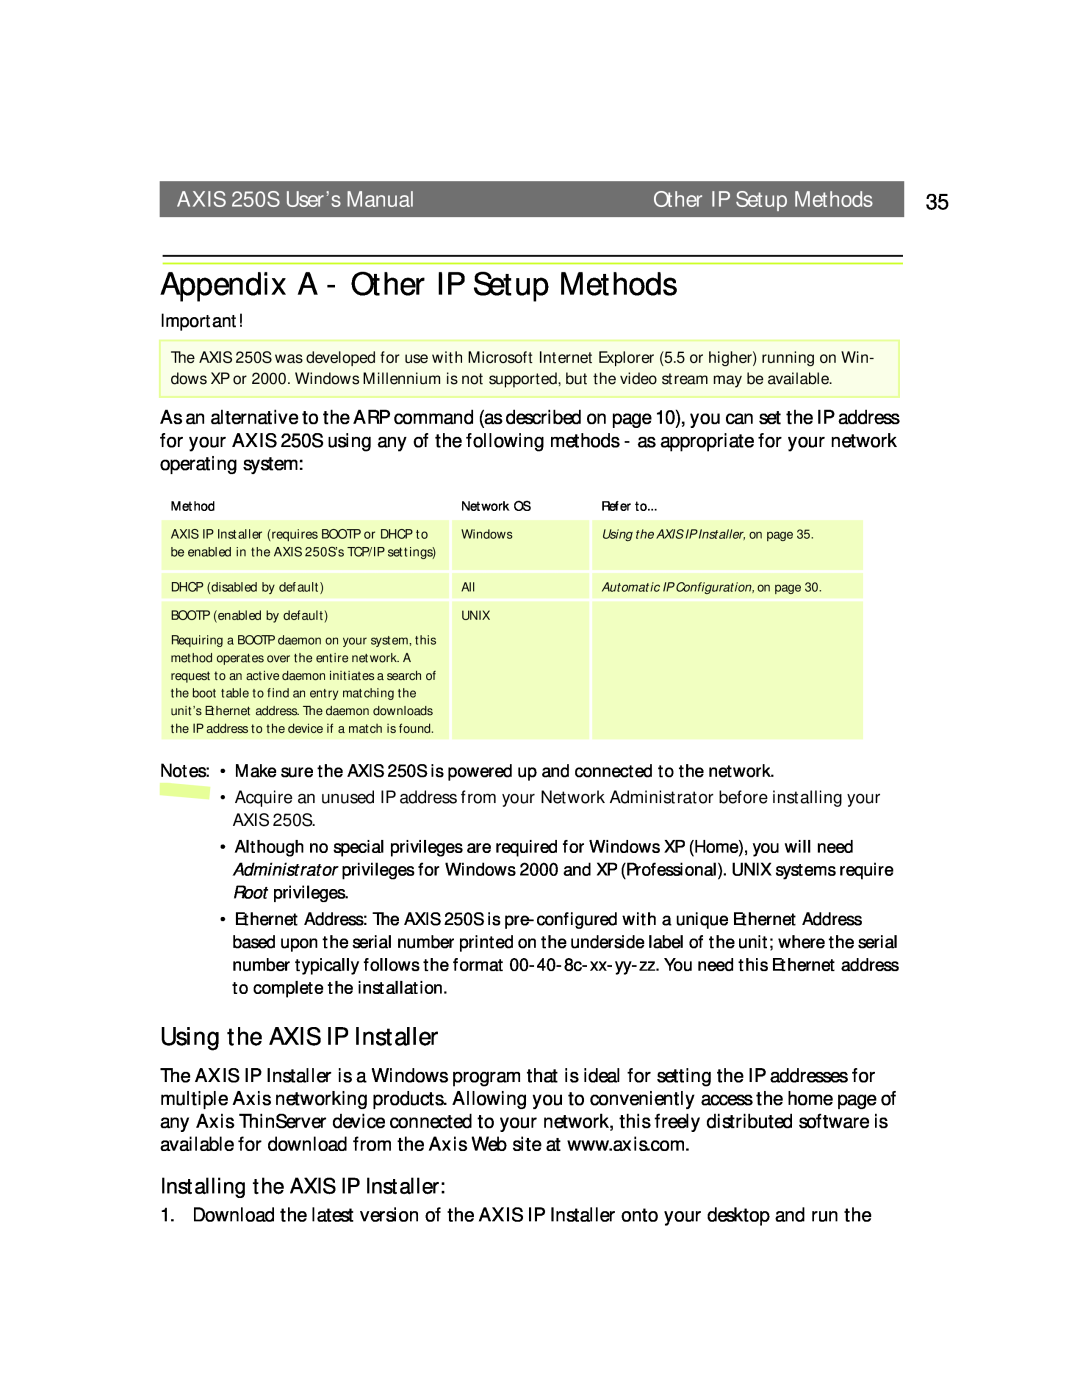 Axis Communications Appendix A - Other IP Setup Methods, Using the AXIS IP Installer, AXIS 250S User’s Manual 